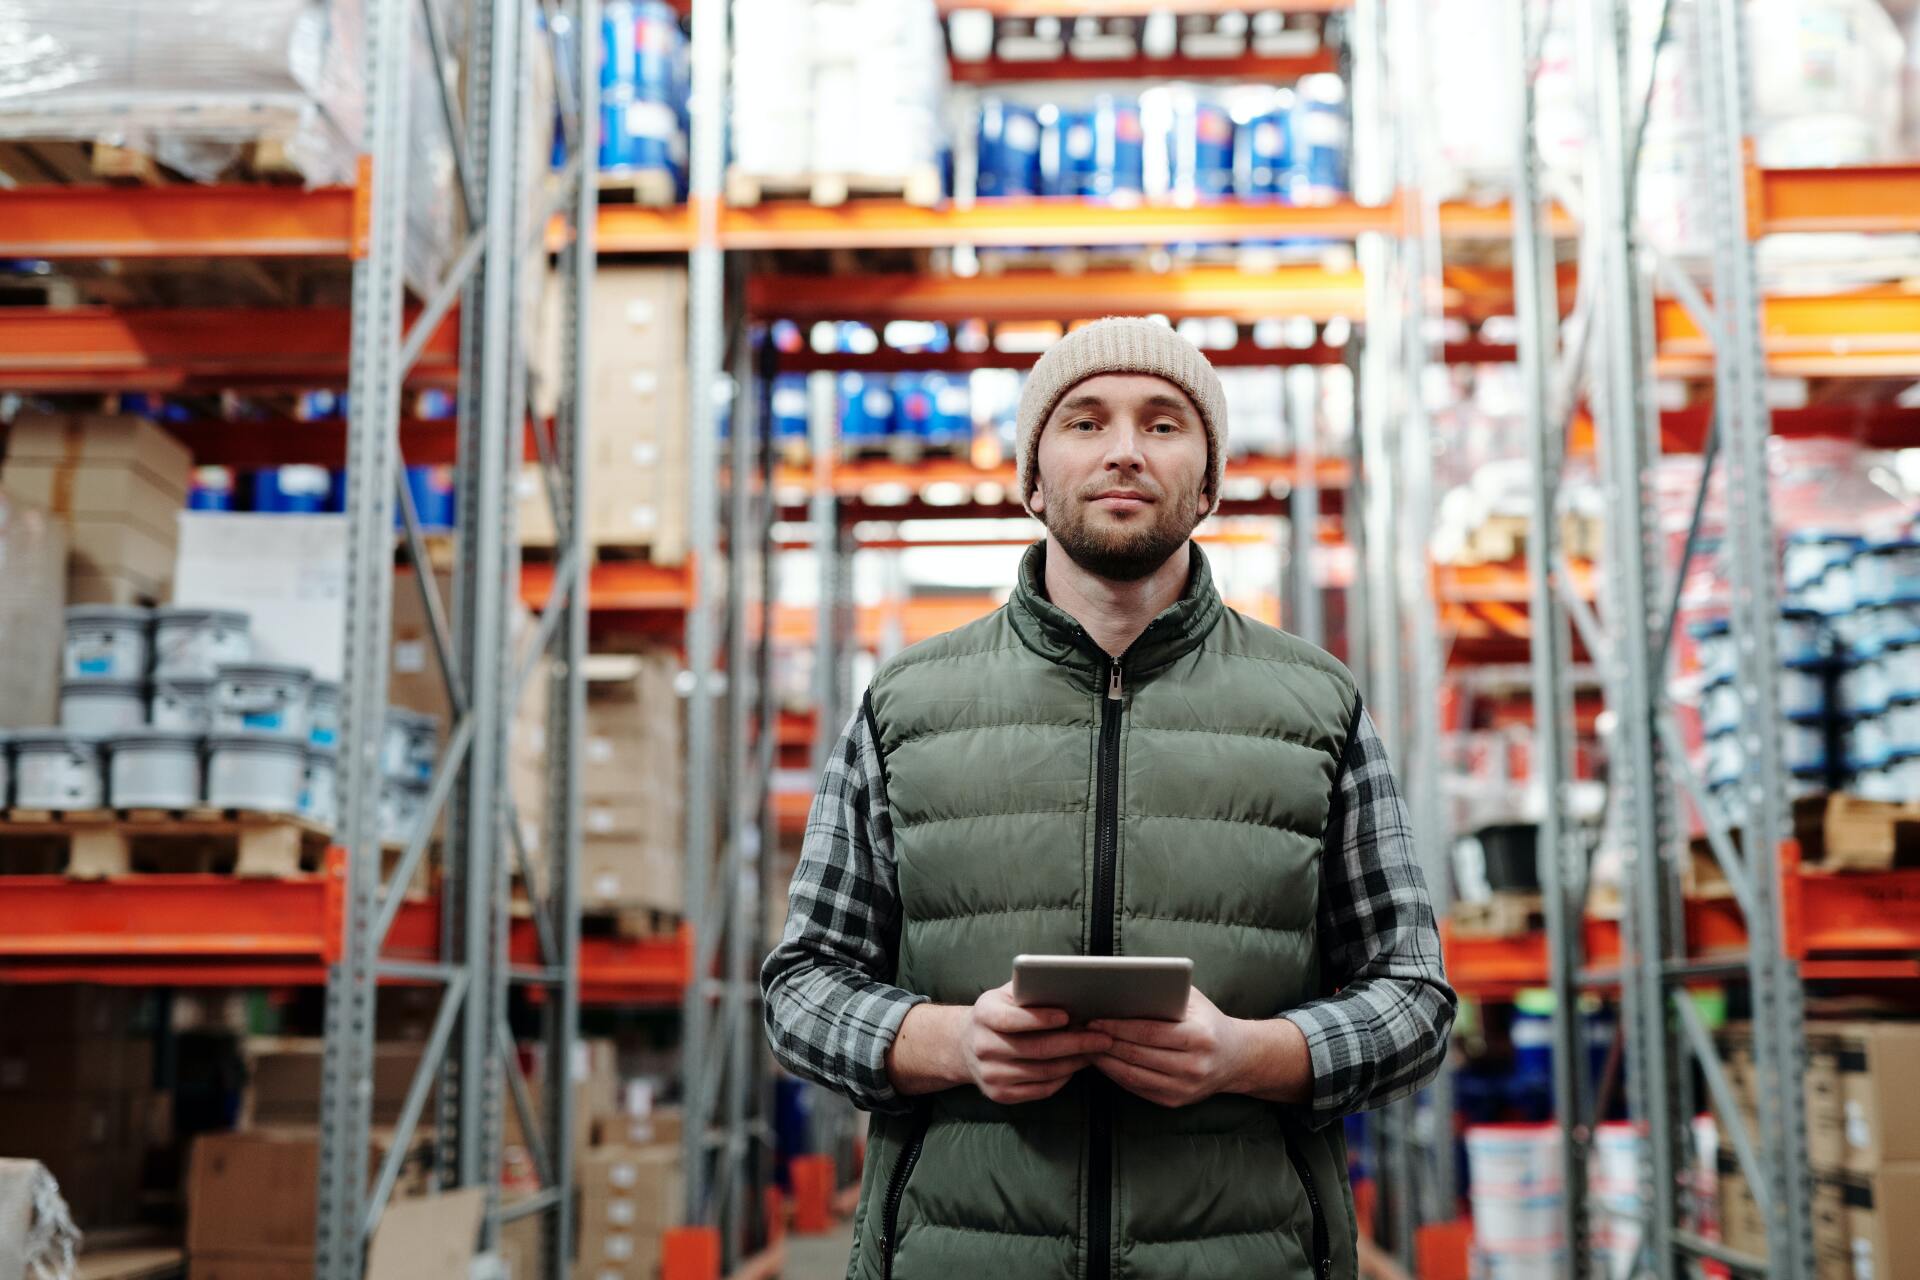 Man in warehouse on tablet looking at camera